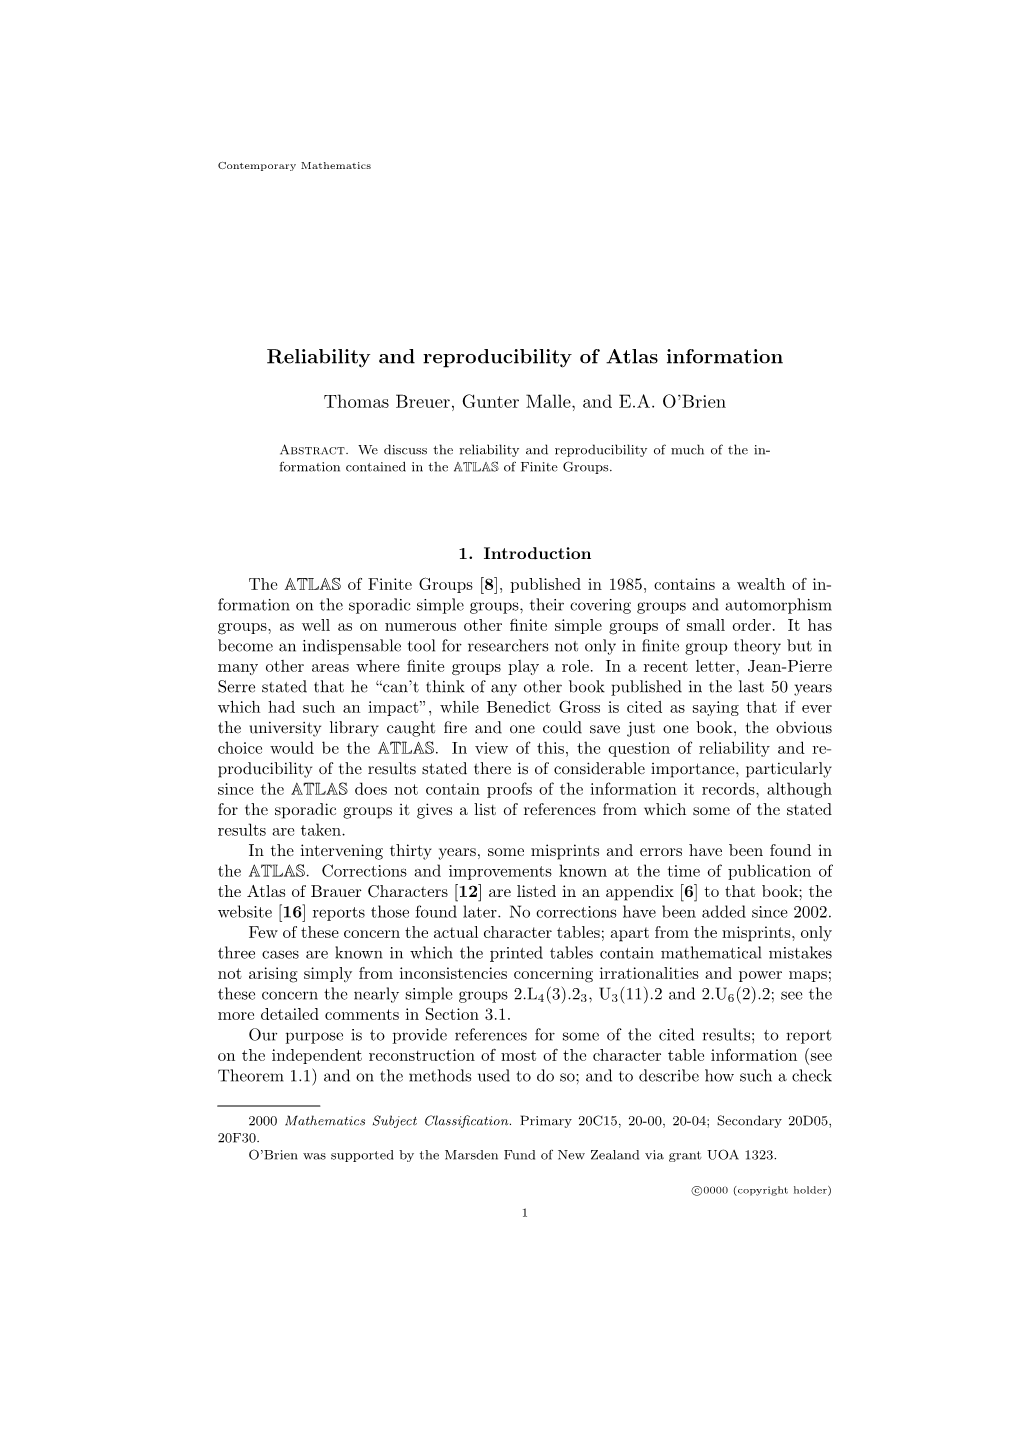 Reliability and Reproducibility of Atlas Information